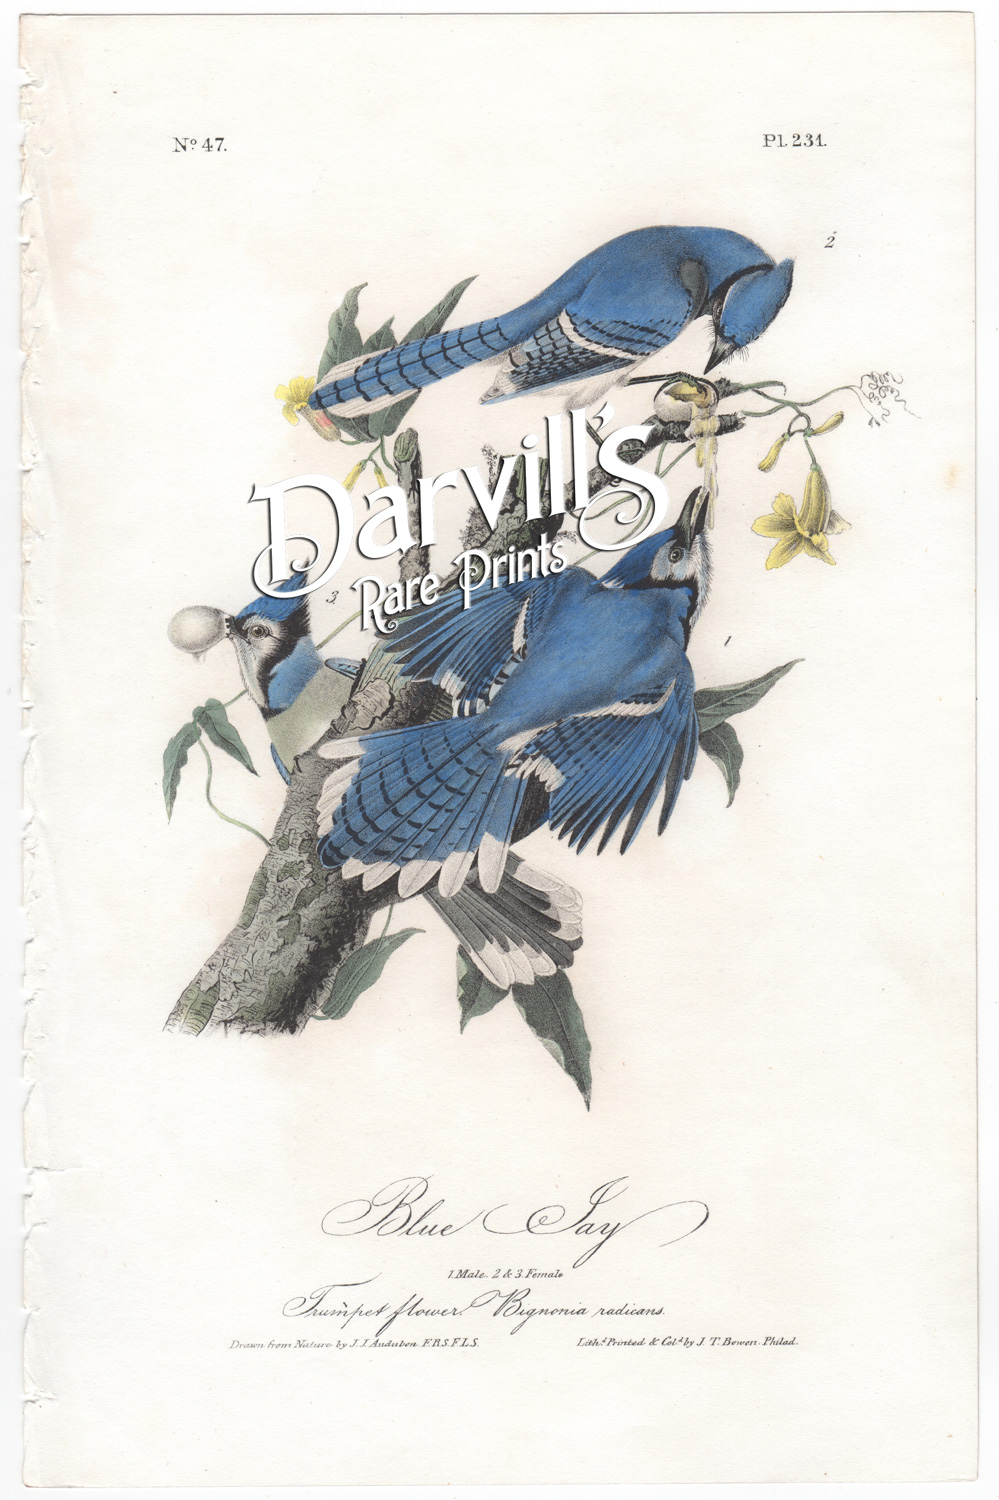 Blue Jay first edition plate 231